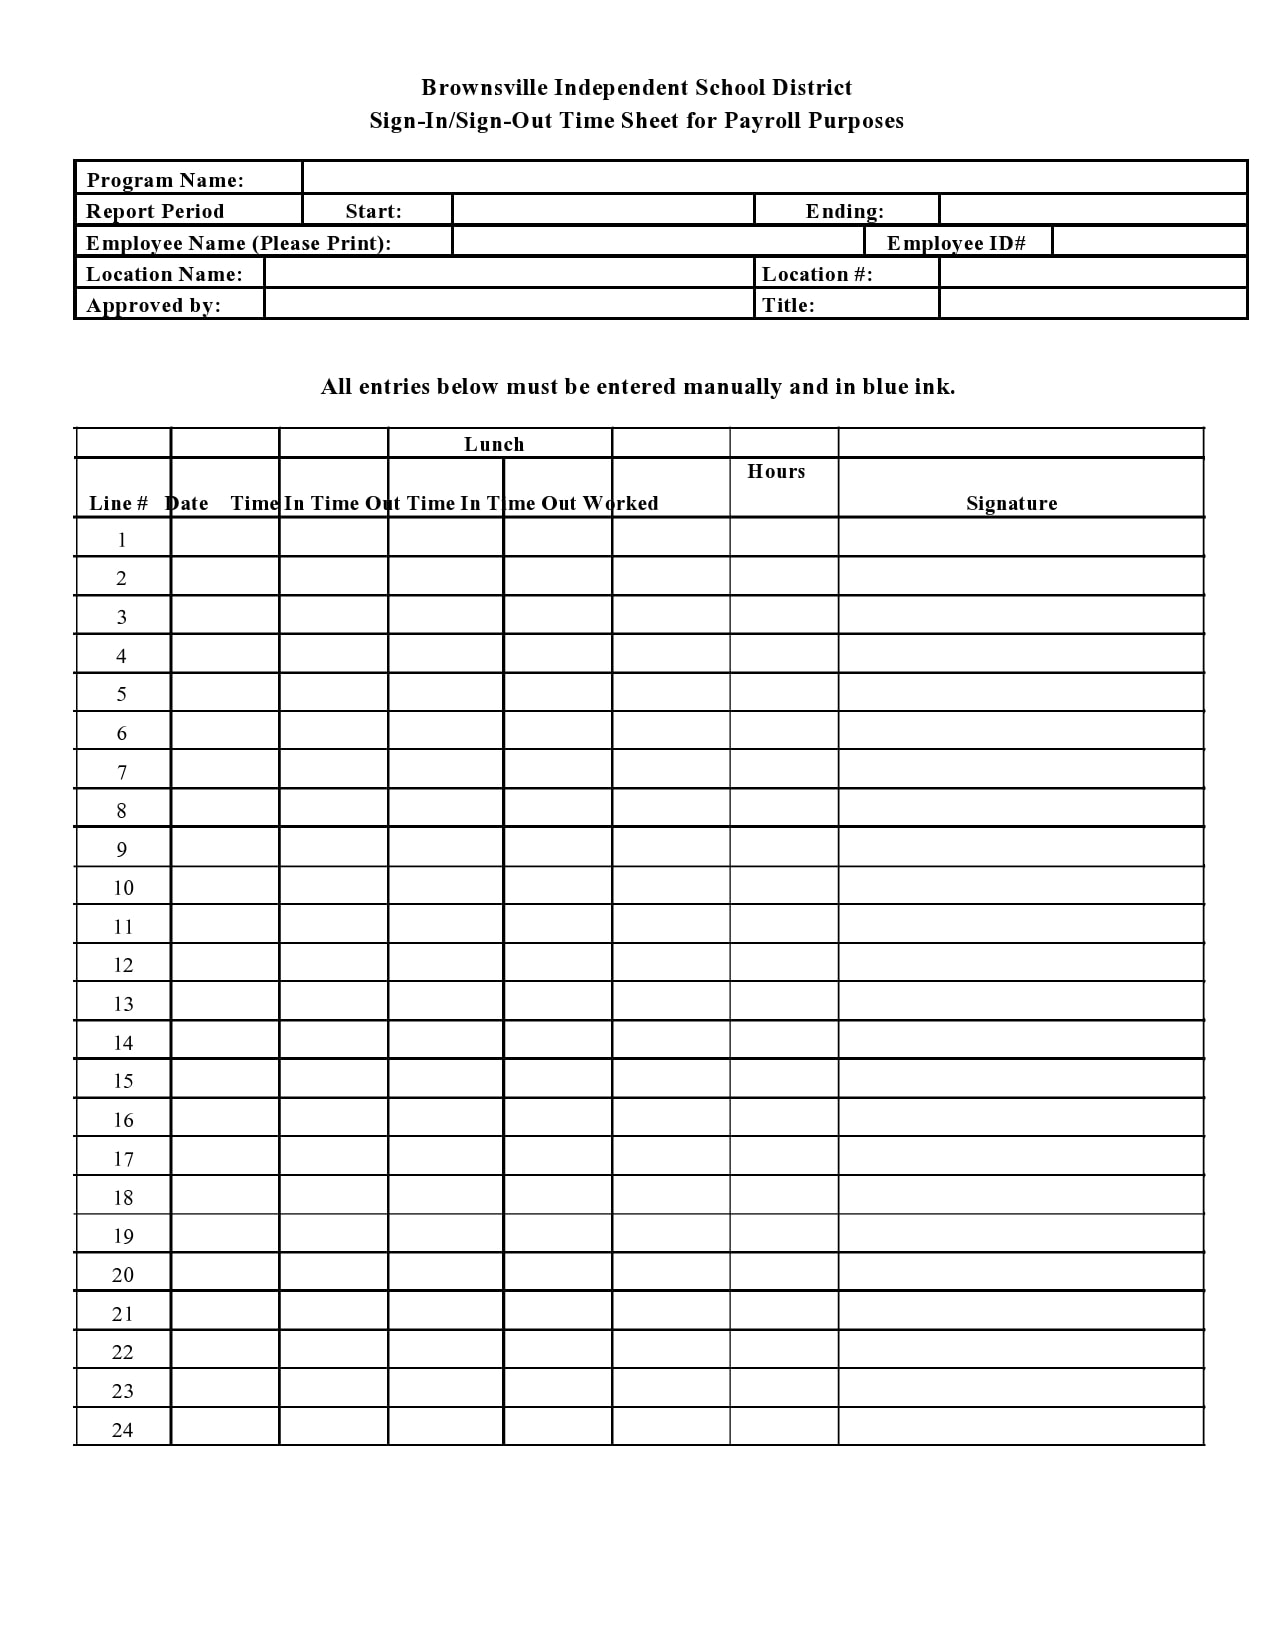 30-printable-sign-in-sign-out-sheets-best-templates-images